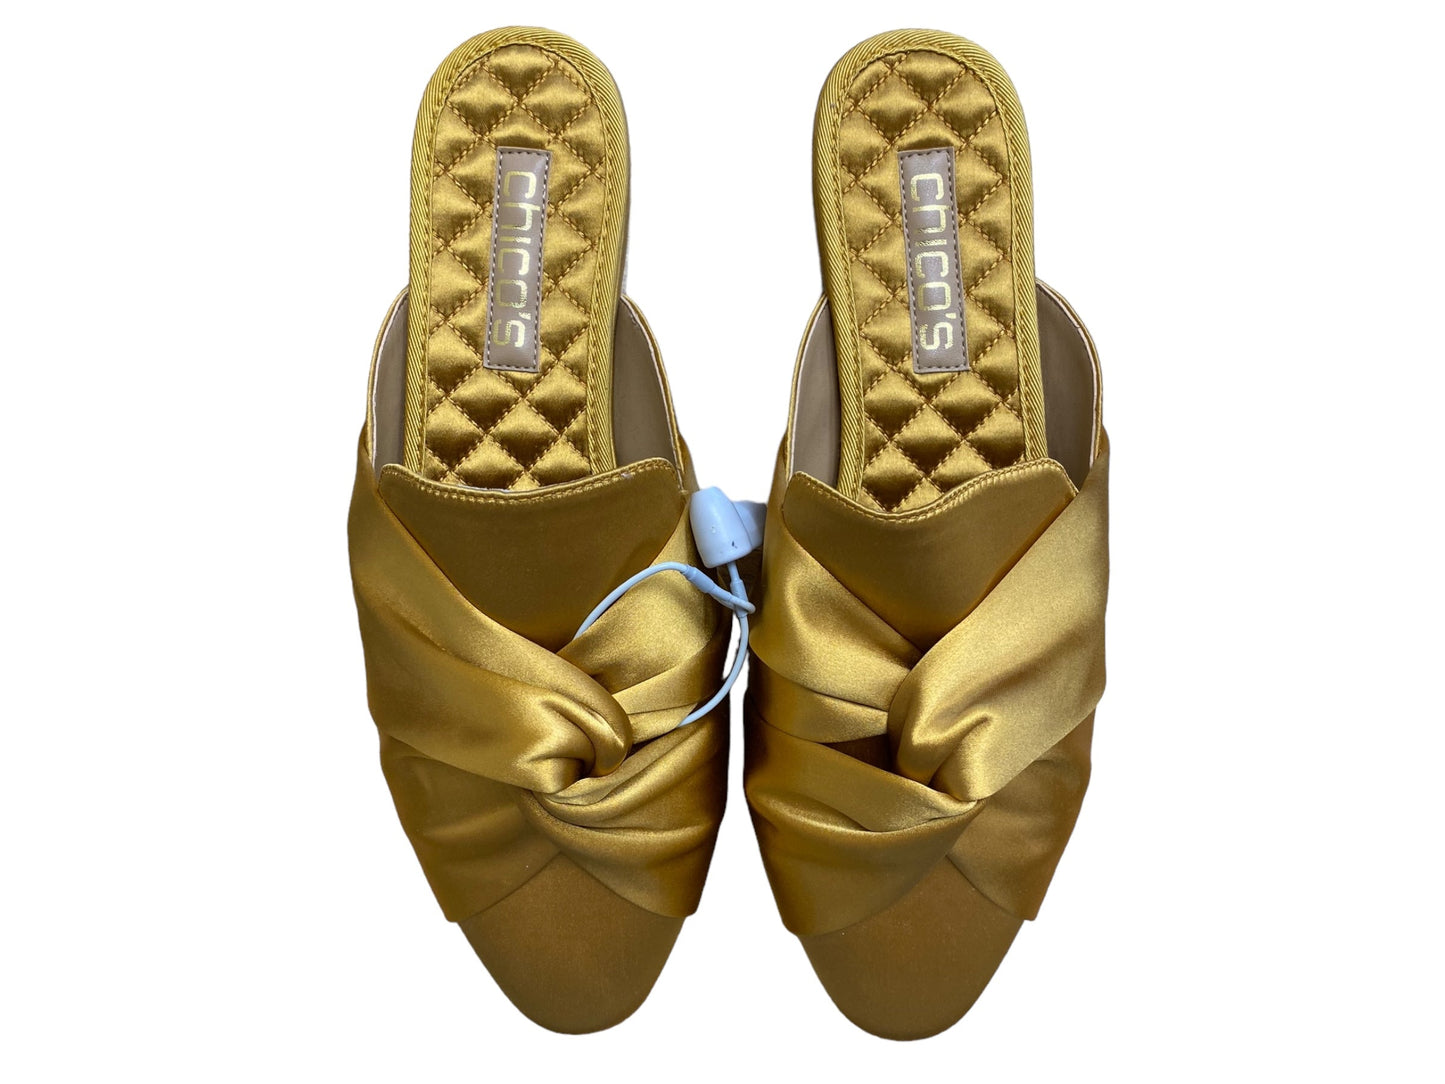 Gold Shoes Heels Block Chicos, Size 8